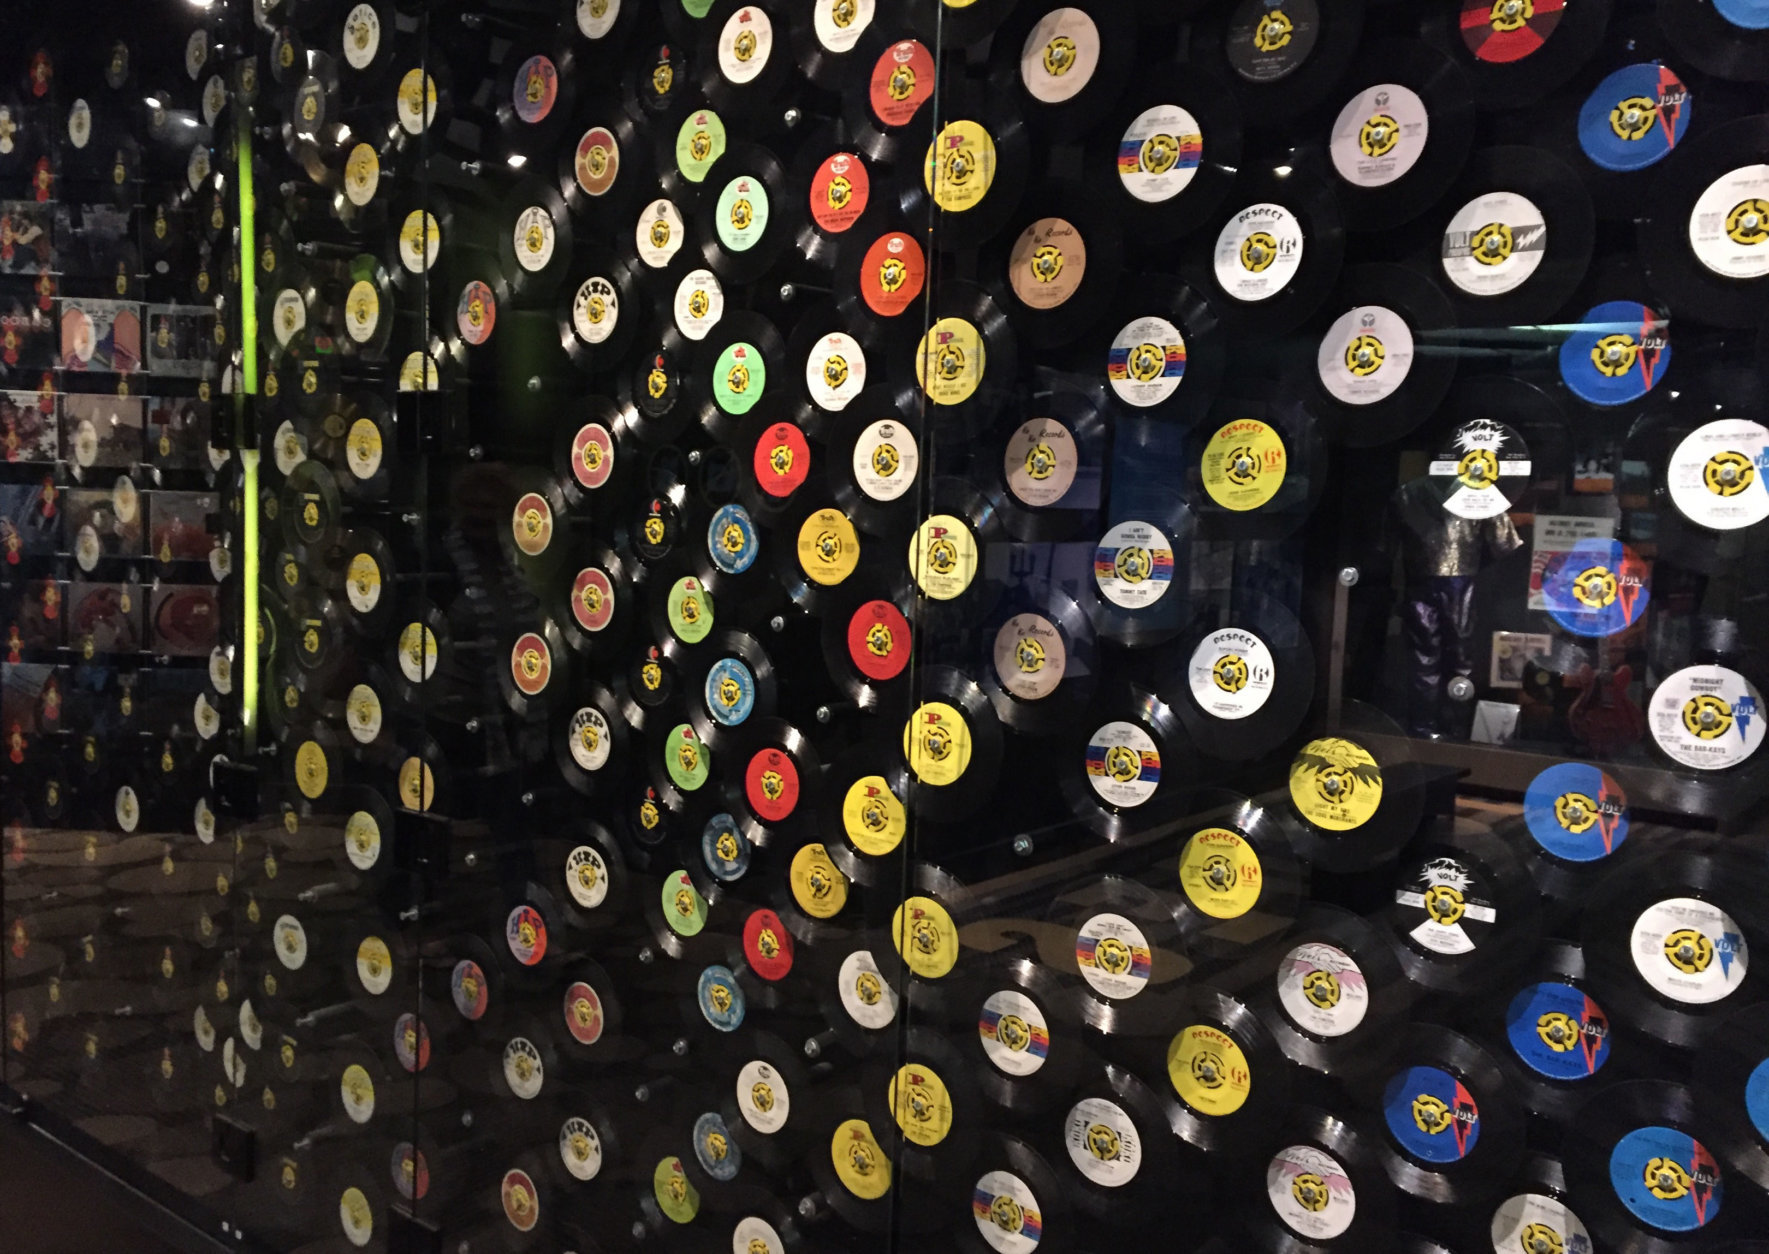 This March 8, 2017 photo shows a display of 45 RPM records at the Stax Museum of American Soul Music in Memphis, Tenn. The Stax recording studio’s roster of stars included Otis Redding, Isaac Hayes and the Staple Singers. Stax eventually went bankrupt but the museum showcases everything from costumes to cars to walls of hit records. (AP Photo/Beth J. Harpaz)